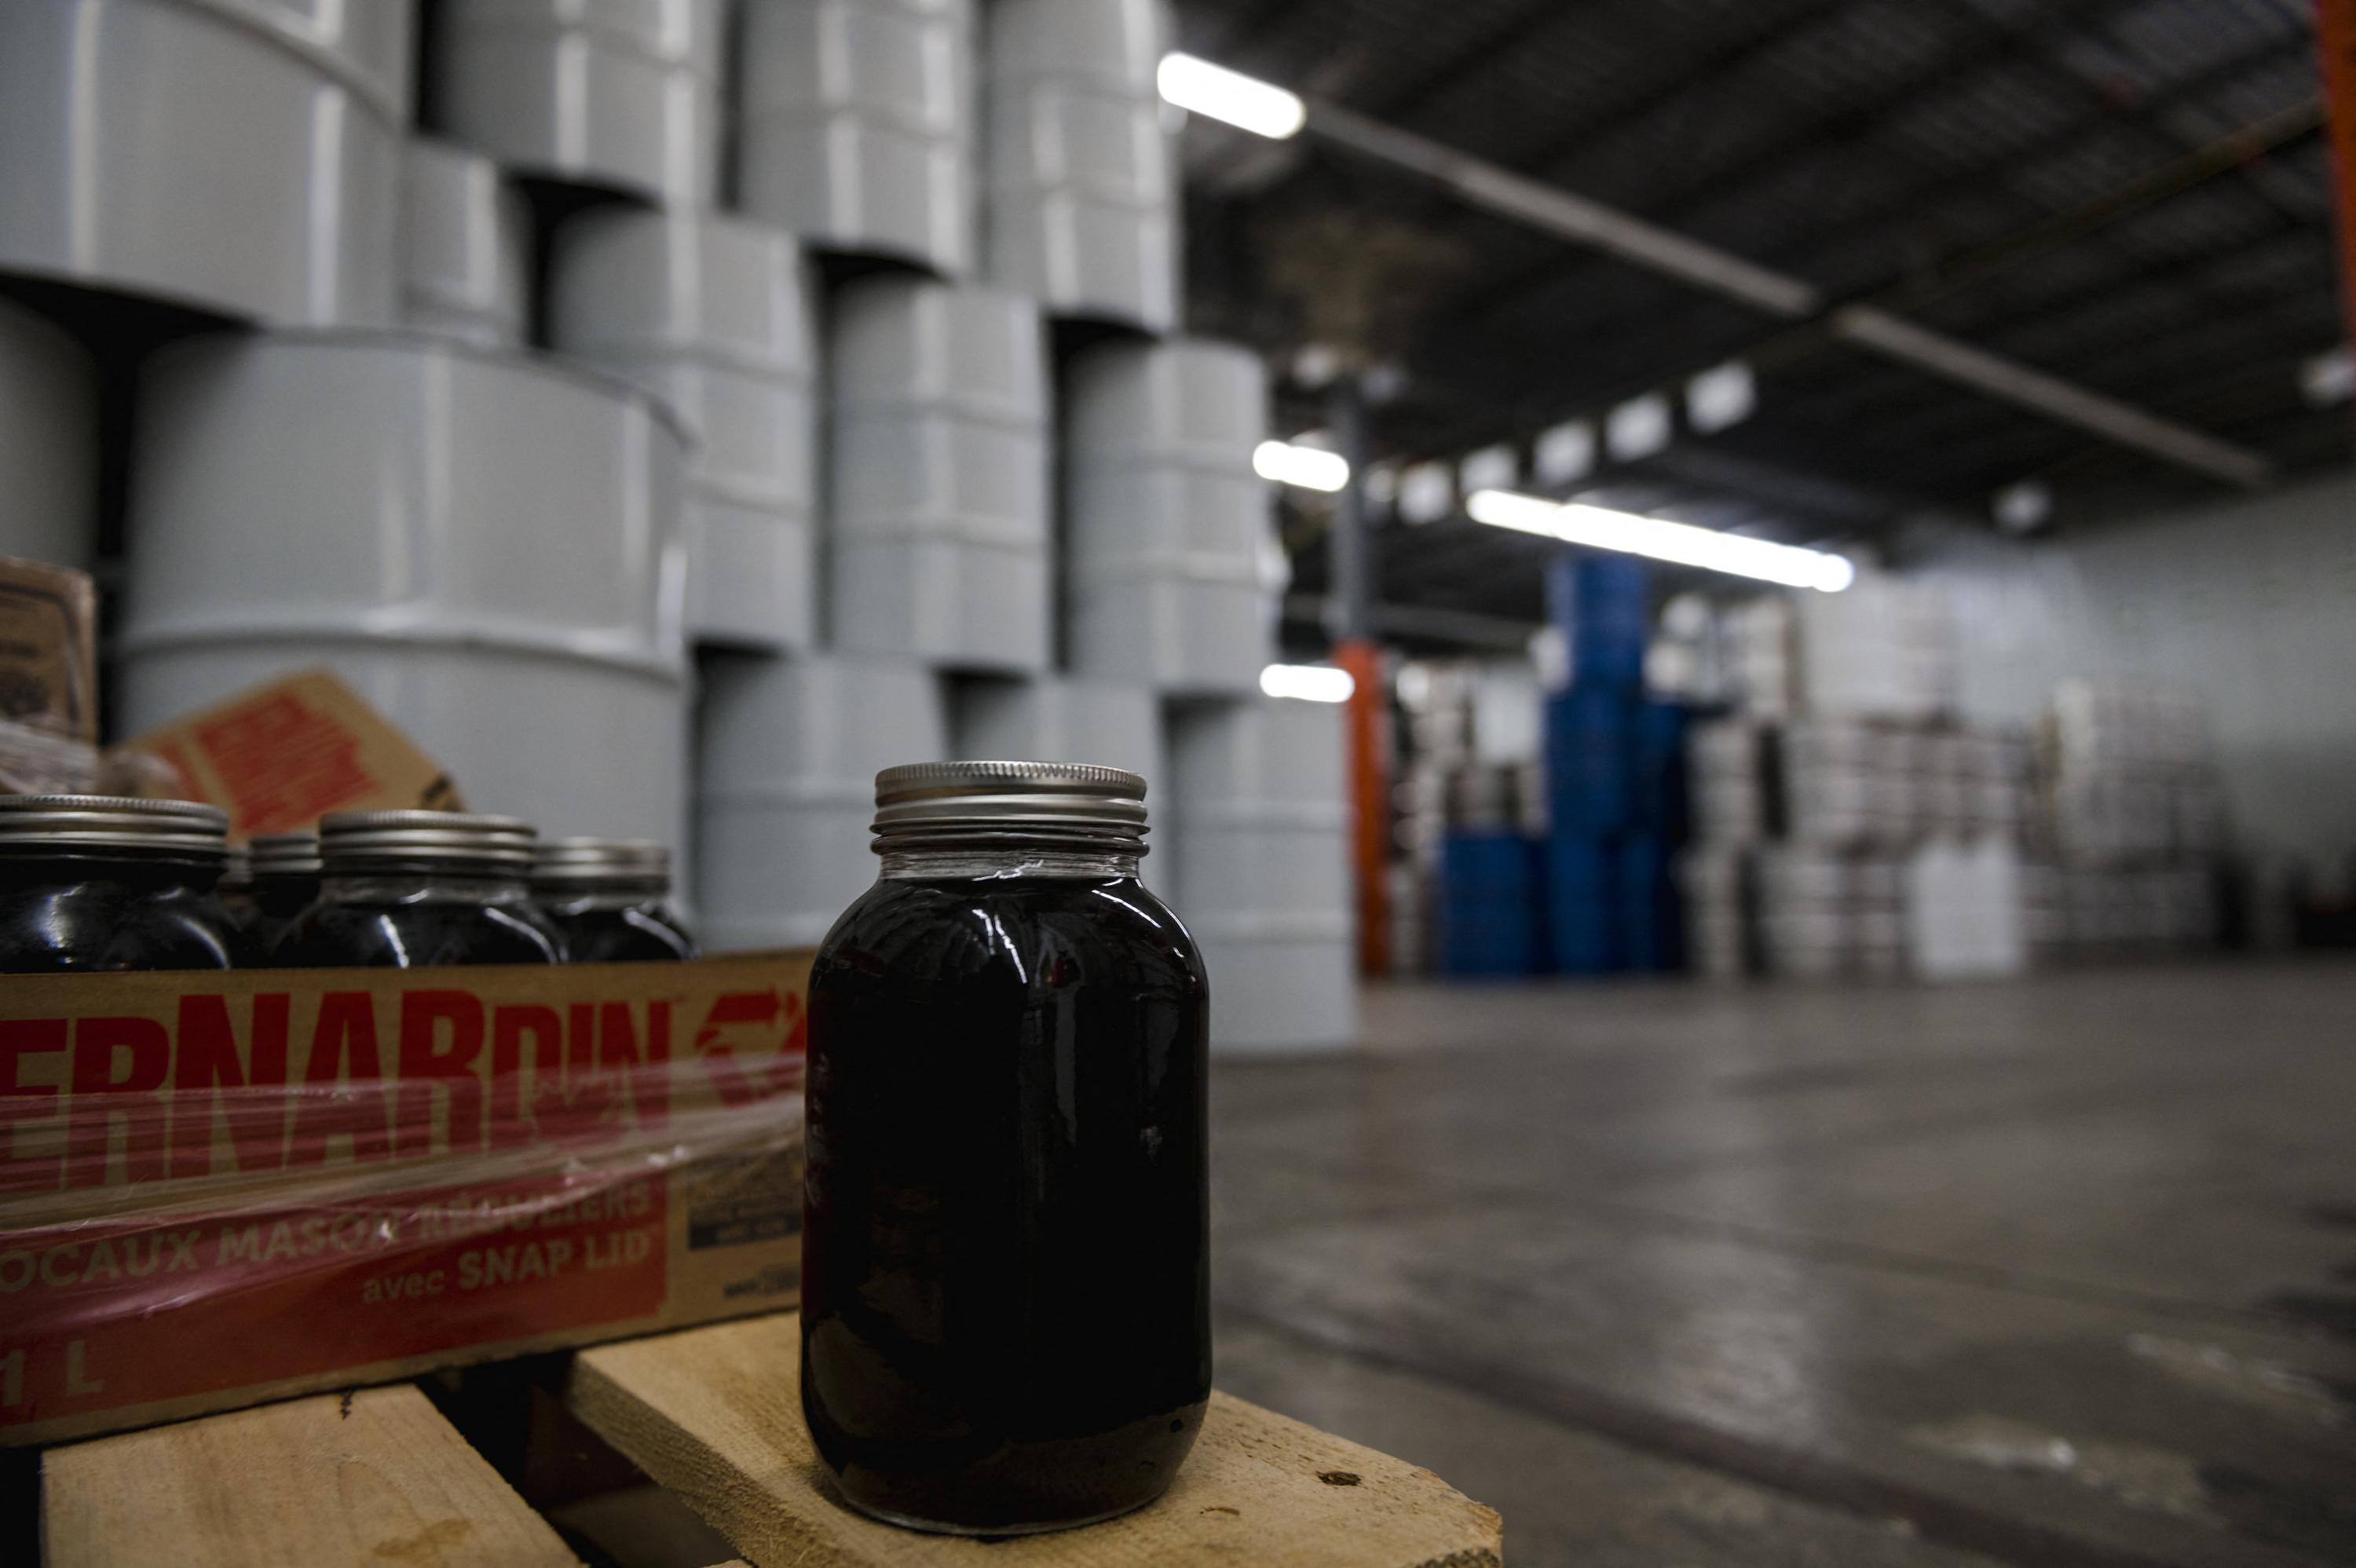 Are we heading towards a global shortage of maple syrup?